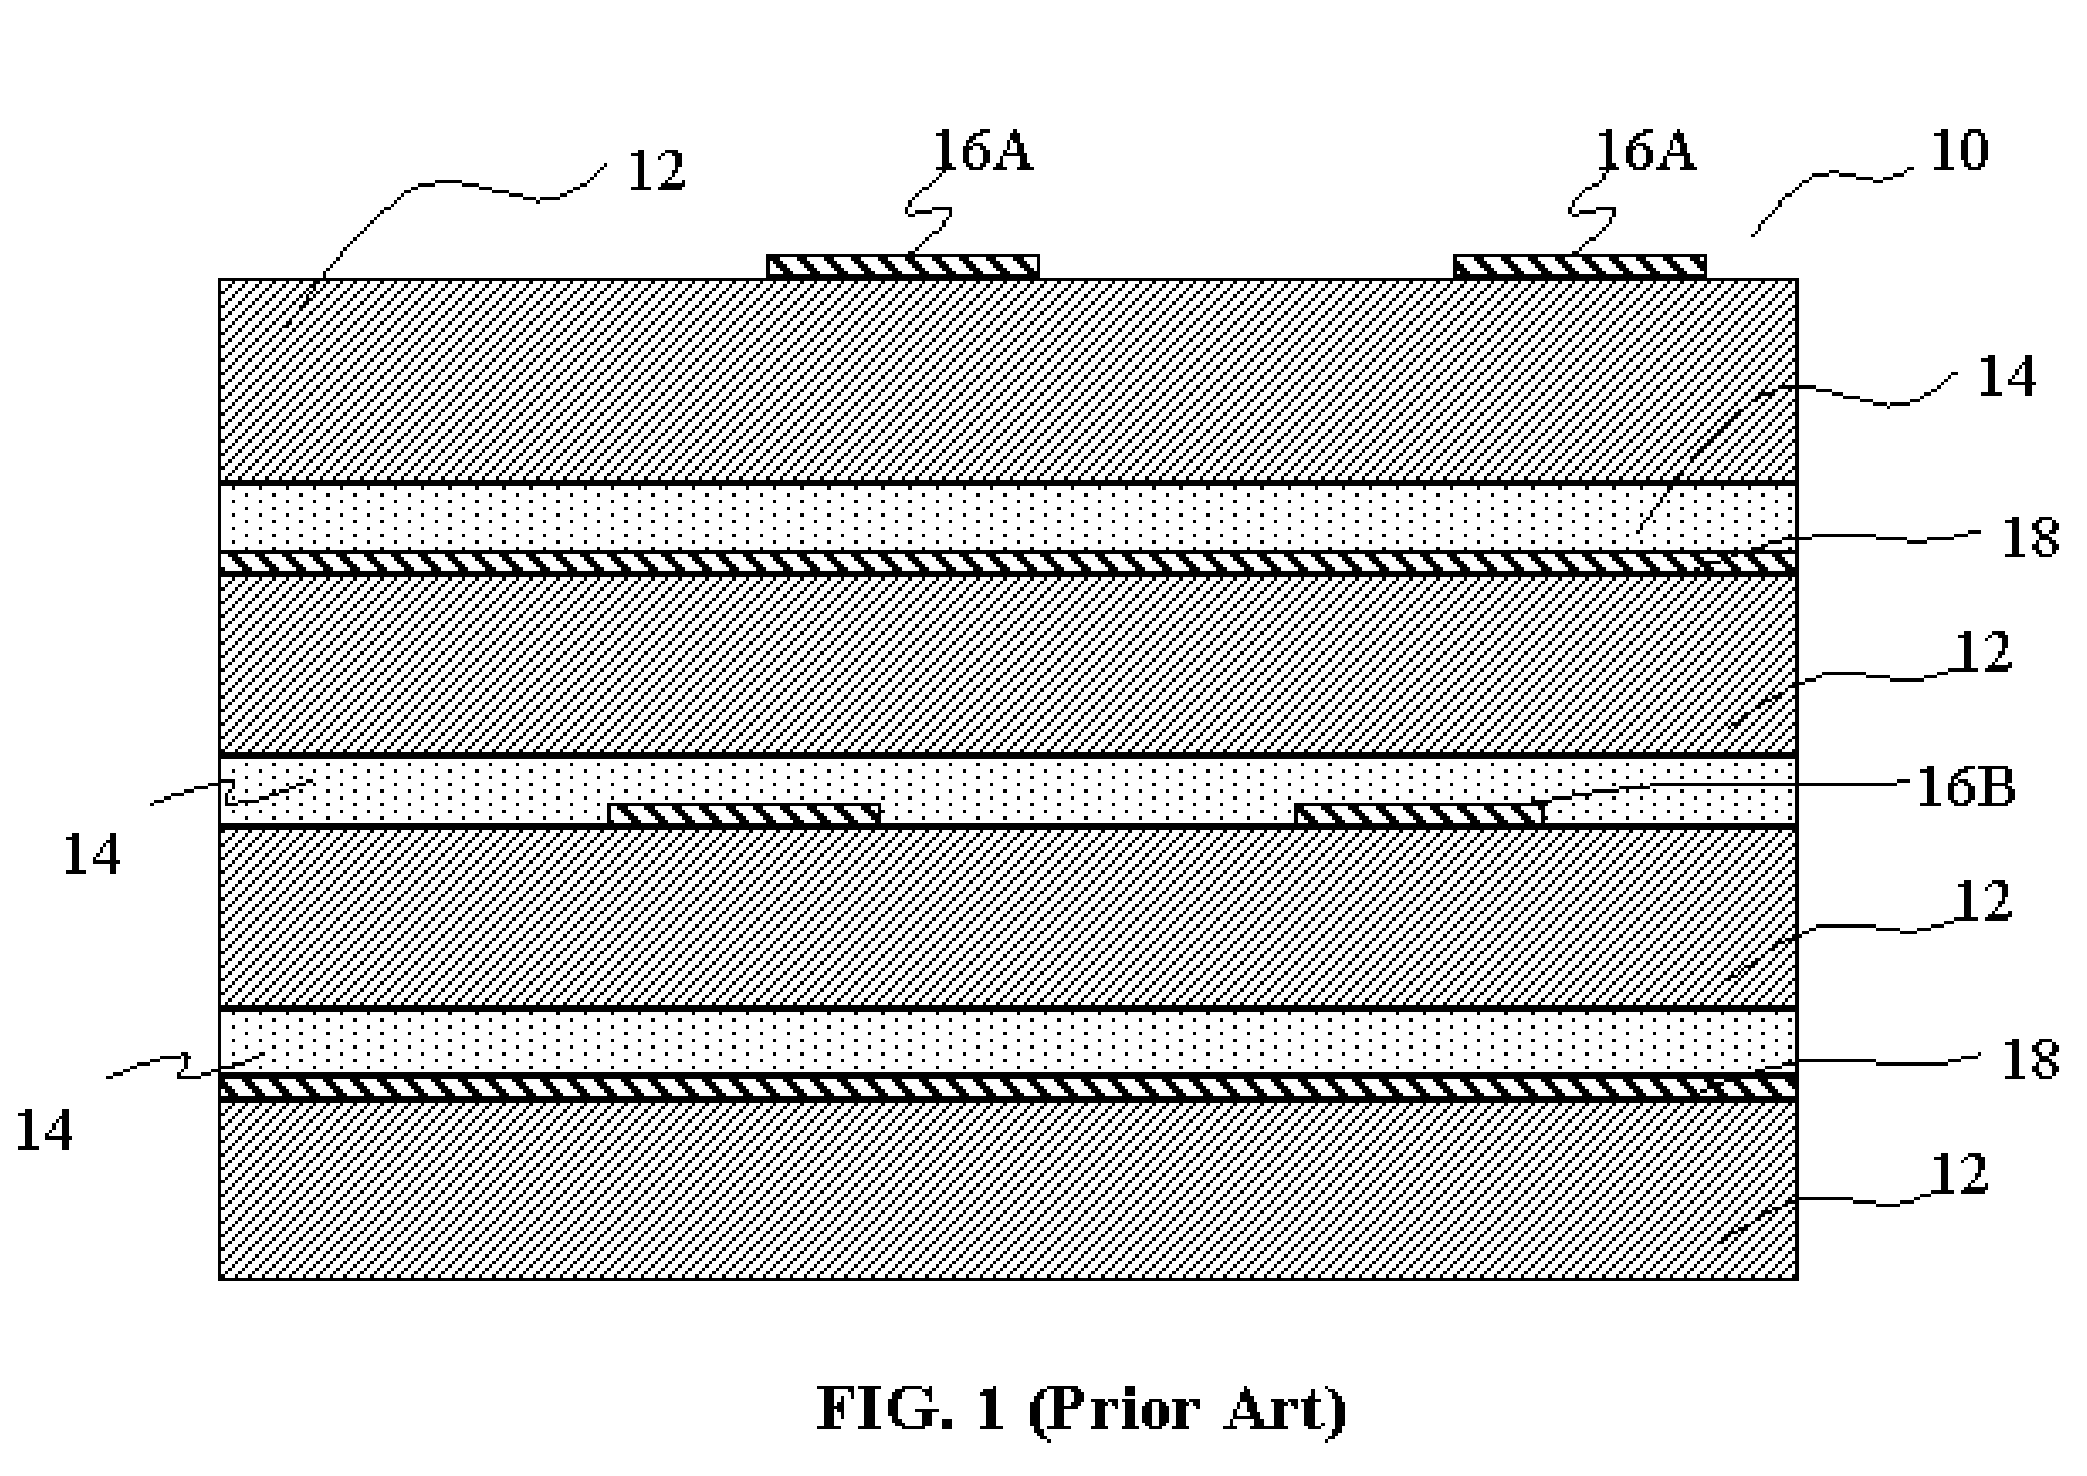 Multi-layered high-speed printed circuit boards comprised of stacked dielectric systems